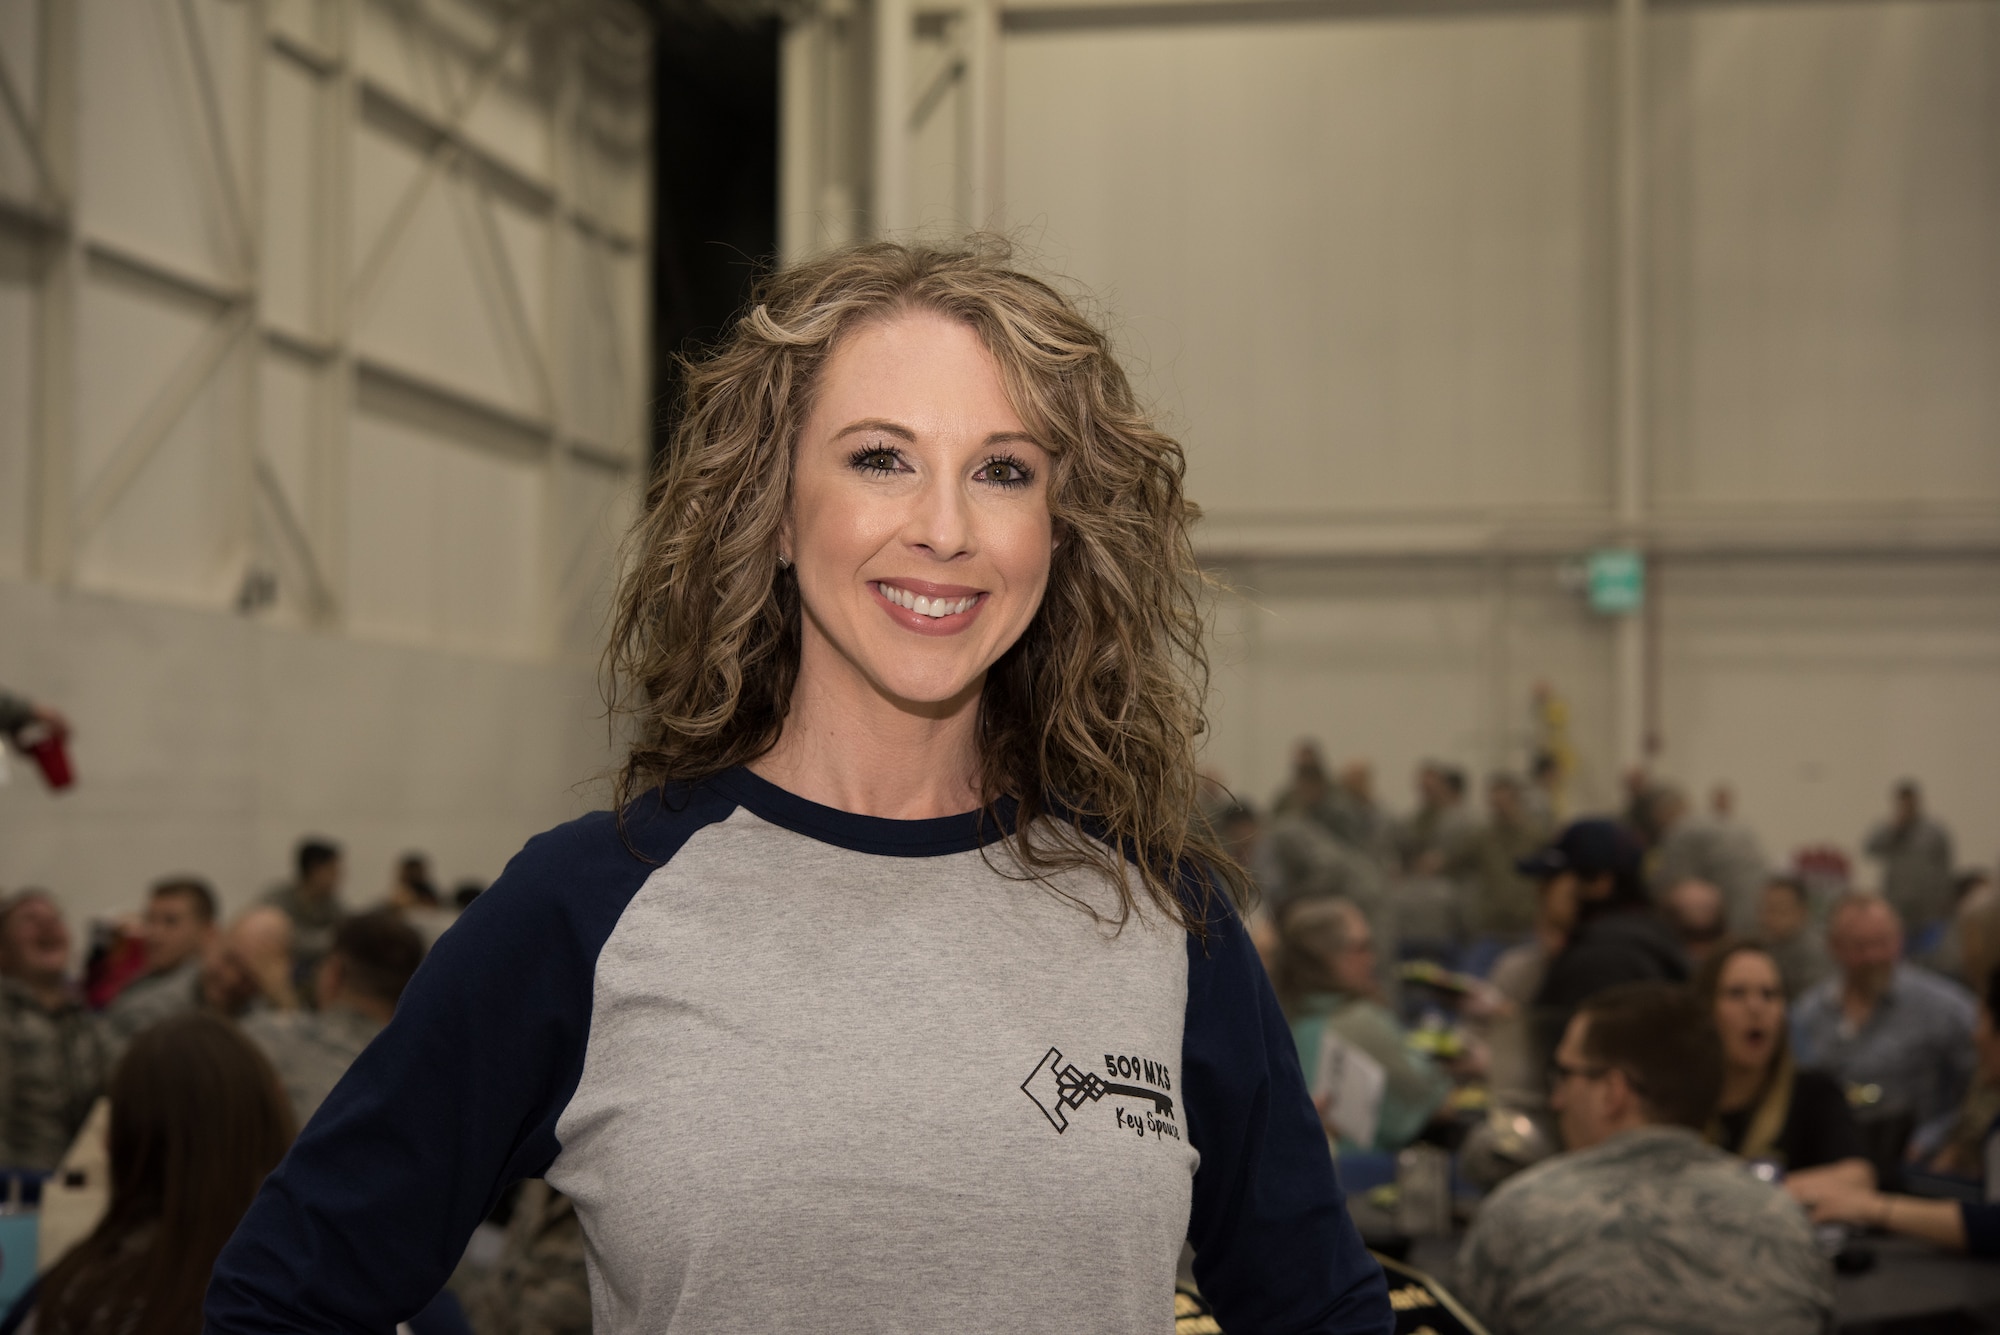 Dover Biery, a 509th Maintenance Squadron Key Spouse Mentor, poses for a portrait on March 15, 2019, at the Maintenance Professional of the Year Banquet at Whiteman Air Force Base, Missouri. Biery was the recipient of the Joan Orr Spouse of the Year Award from Air Force Global Strike Command for 2018. (U.S. Air Force photo by Airman Parker J. McCauley)